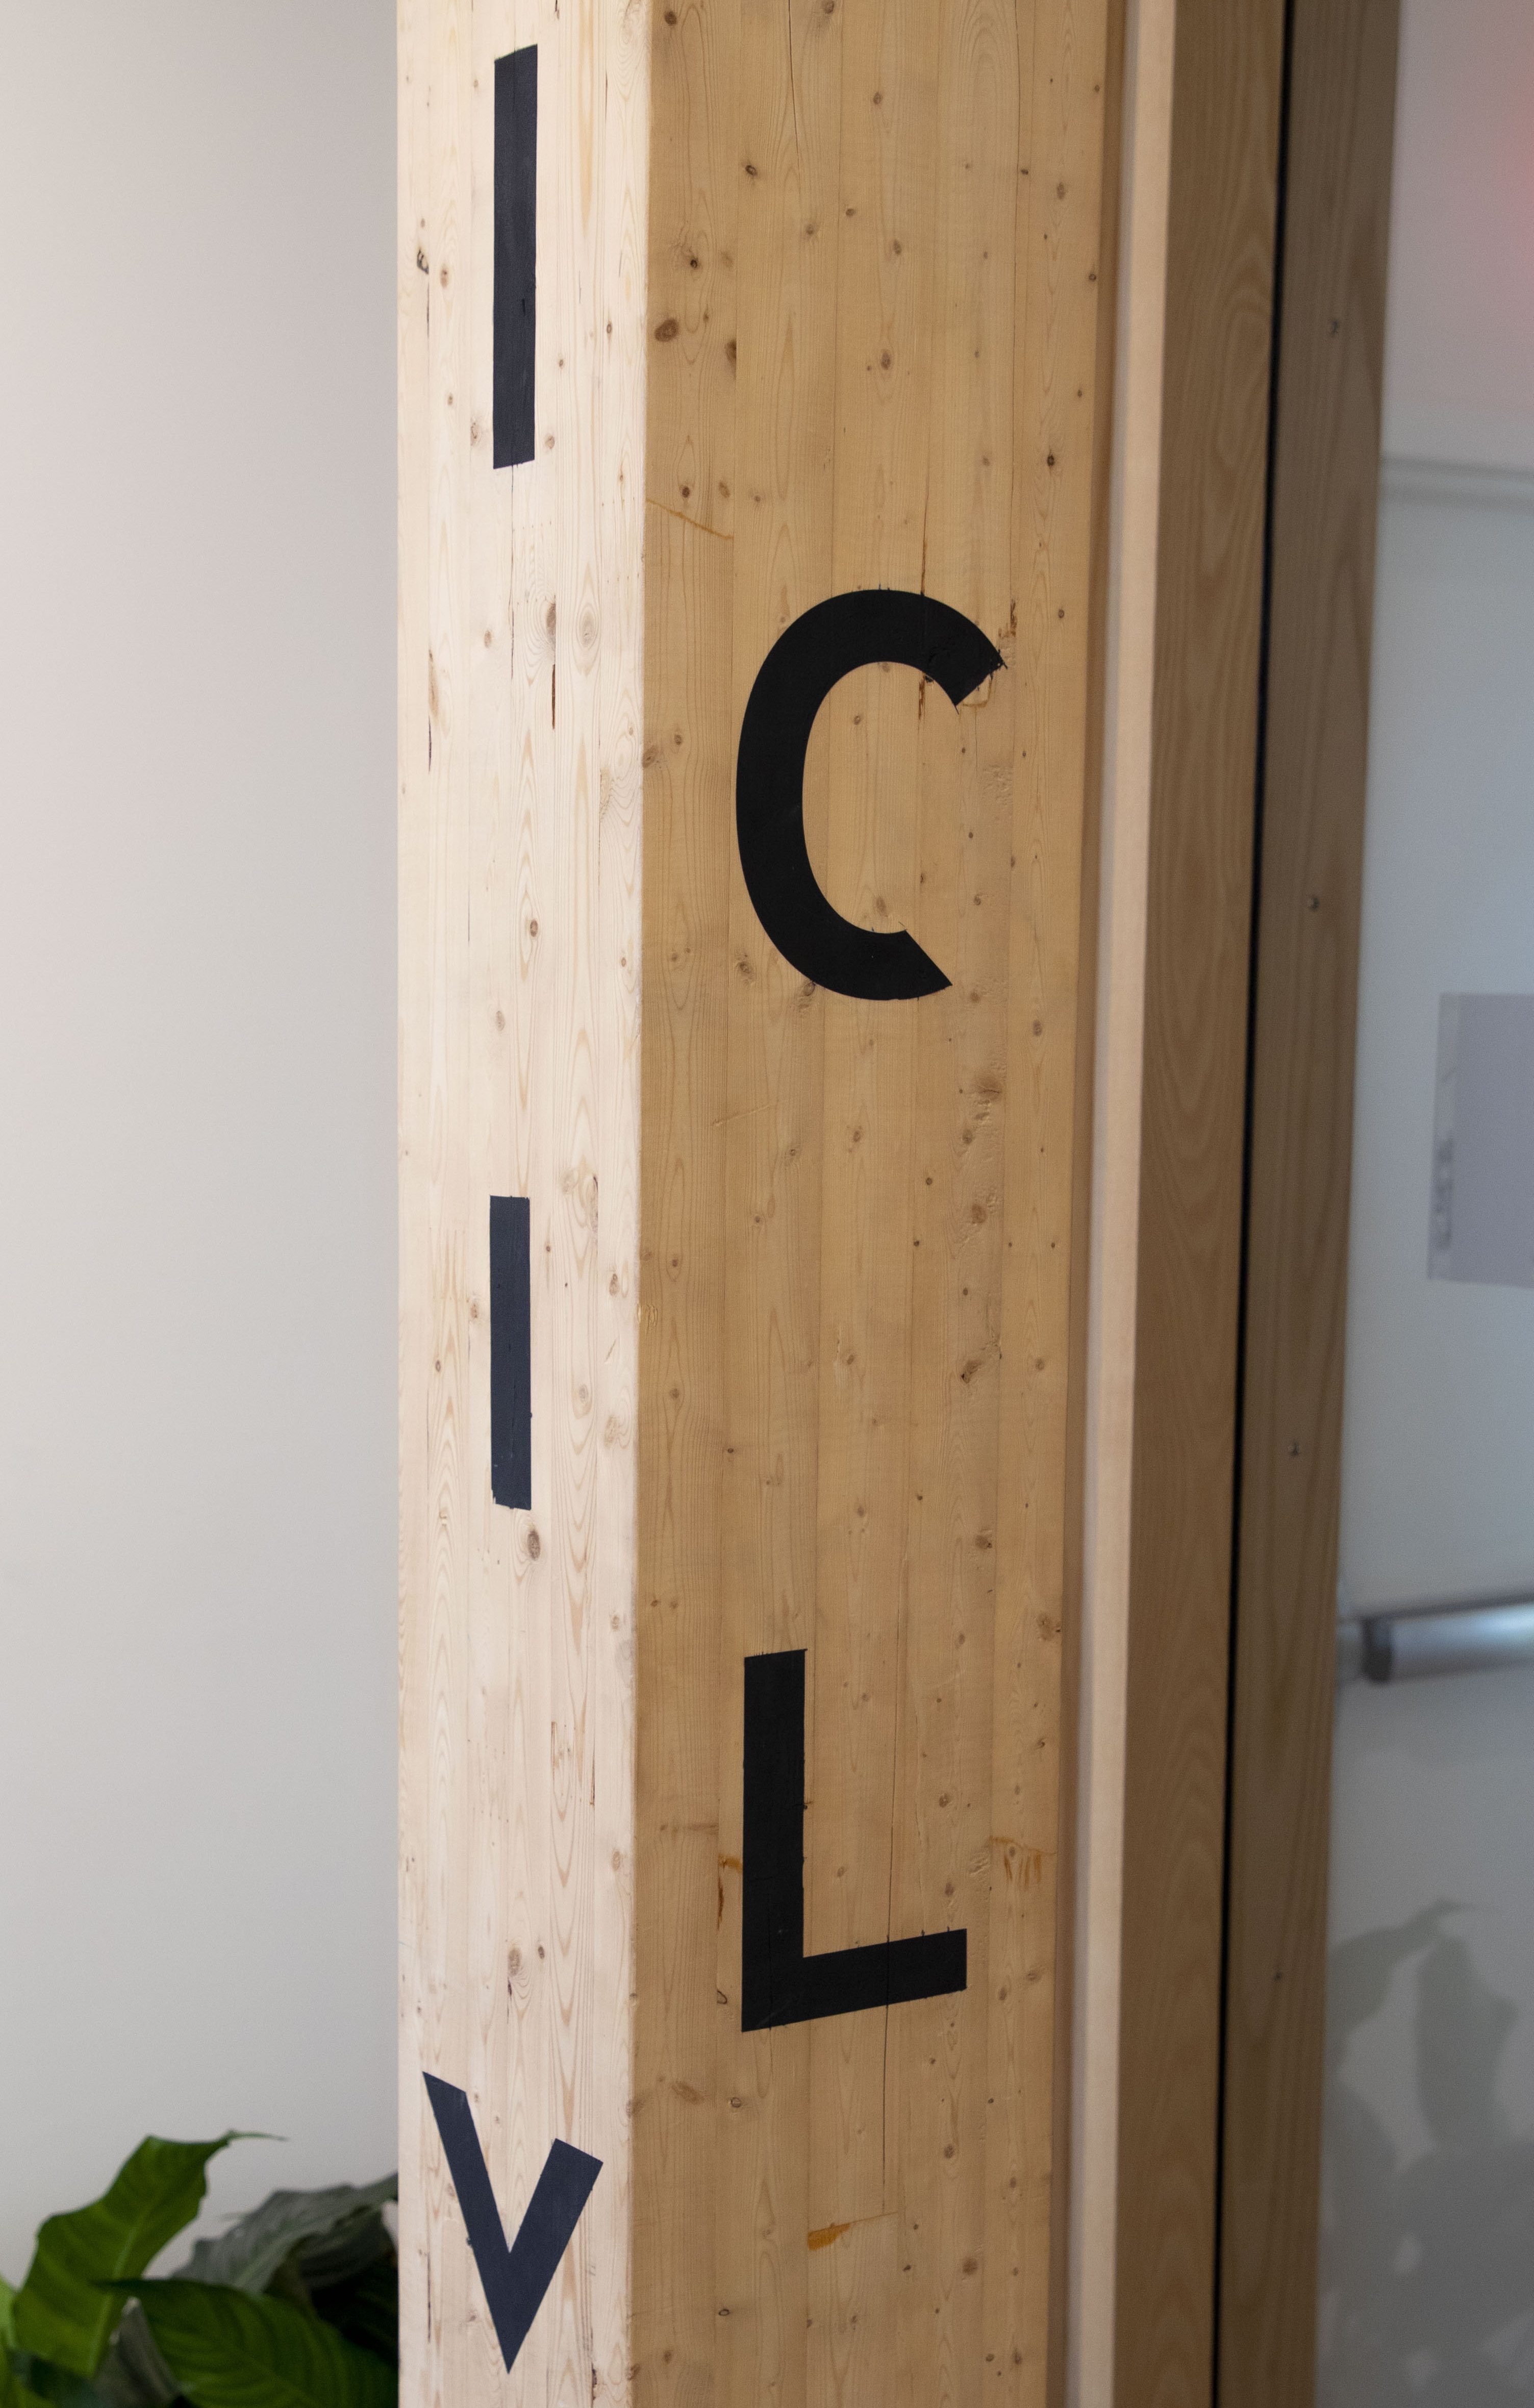 Timber column with black letters and shapes on it.